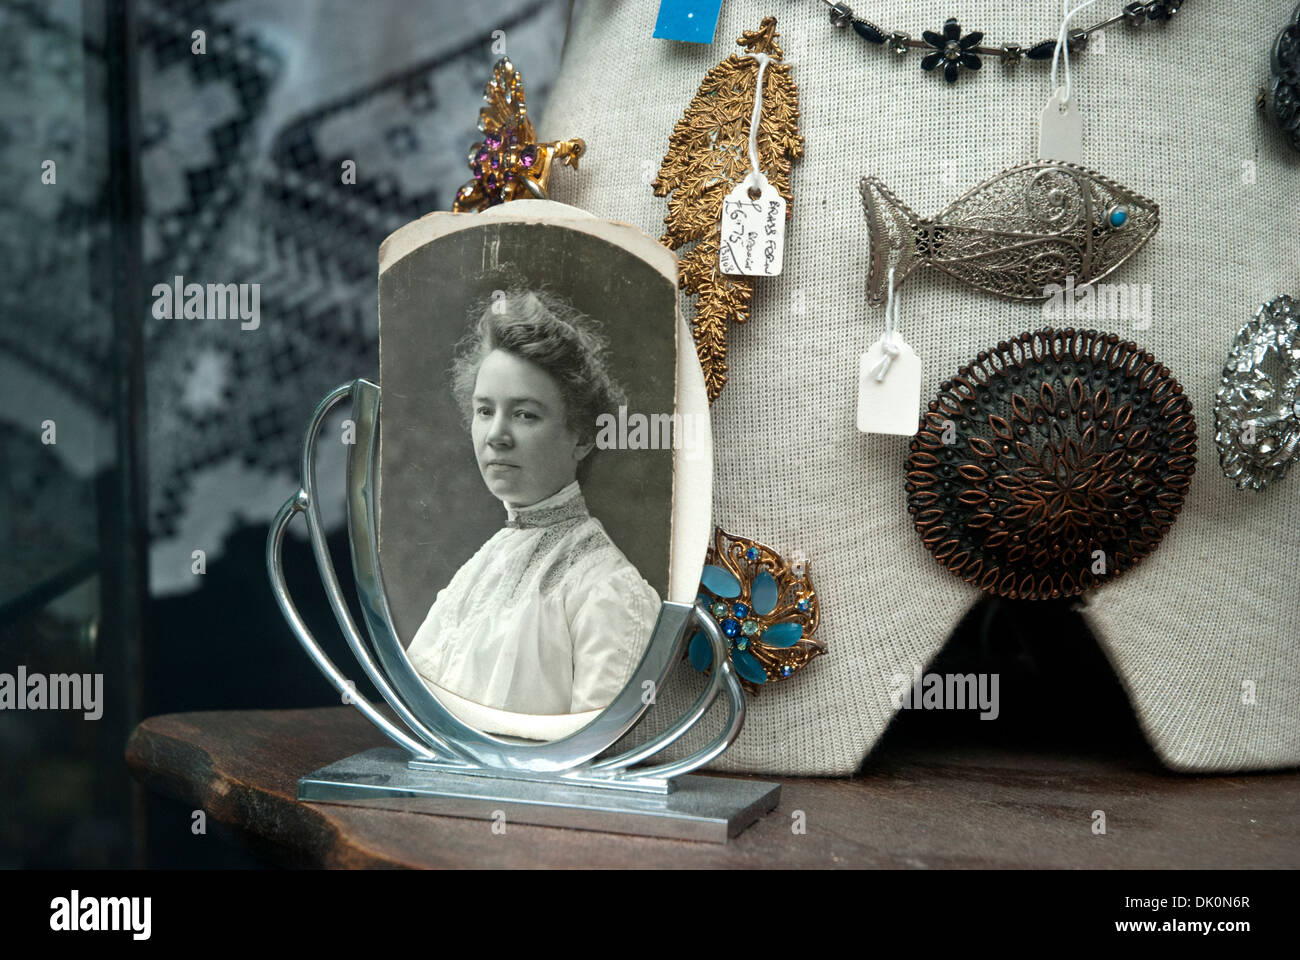 Black and white photograph of a Victorian woman on display in an antique/junk shop window. Stock Photo